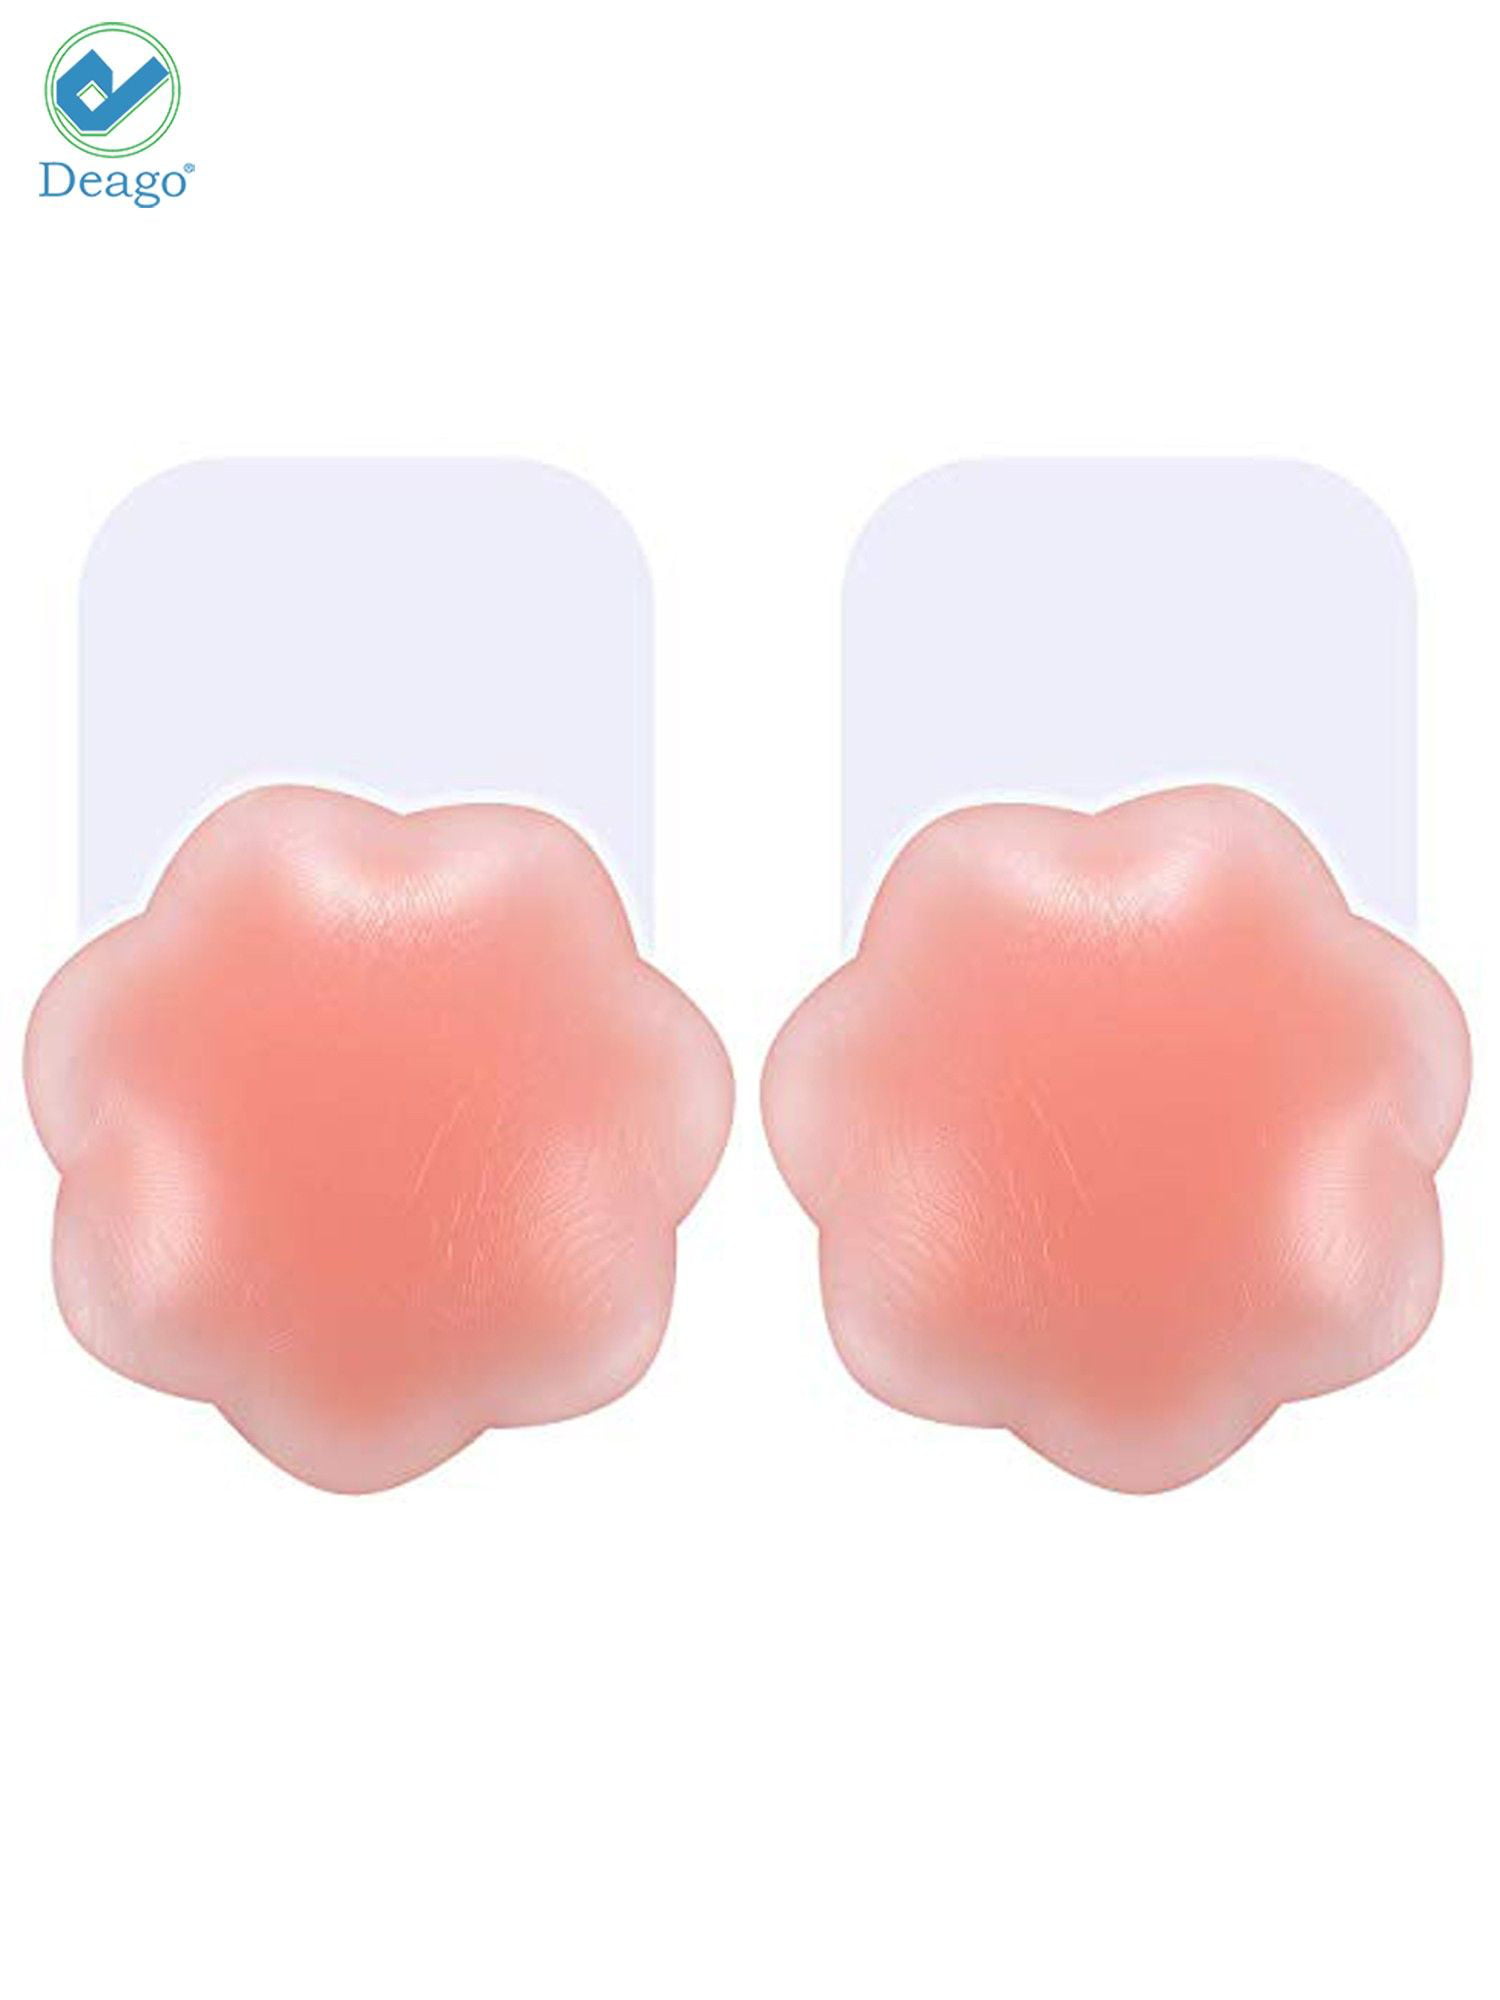 Invisible Reusable Nipple Stickies/covers 4 Inclusive Shades N4 